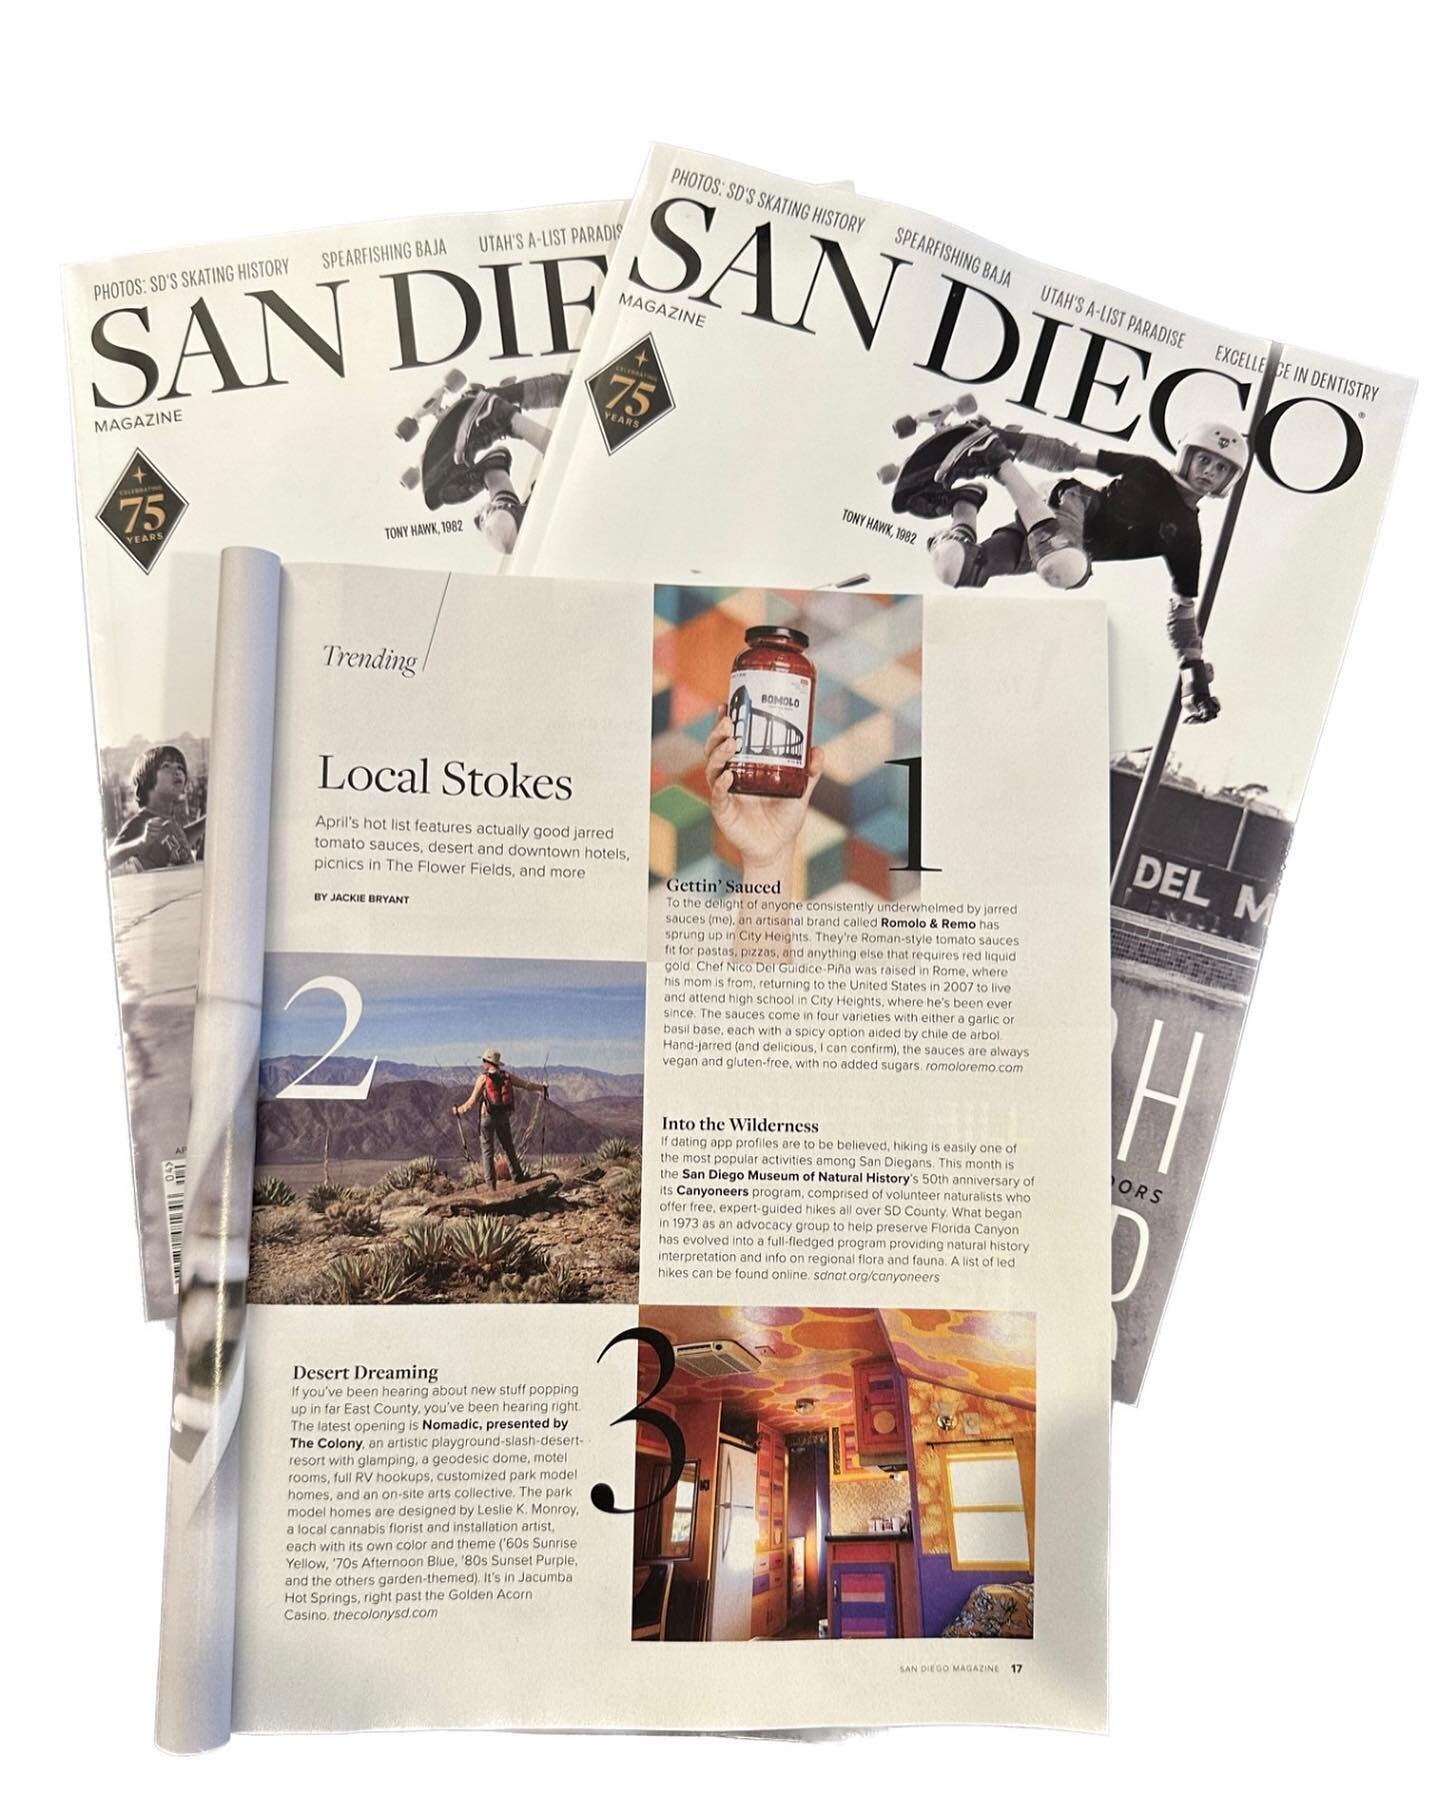 Hey Maa! We&rsquo;re trending #1 in San Diego! 🤪

&ldquo;April&rsquo;s hot list features actually good jarred tomato sauces&rdquo; - @jacqbry 🚀

An absolute honor being featured in April&rsquo;s edition of the @sandiegomag Trending Column! Thank yo